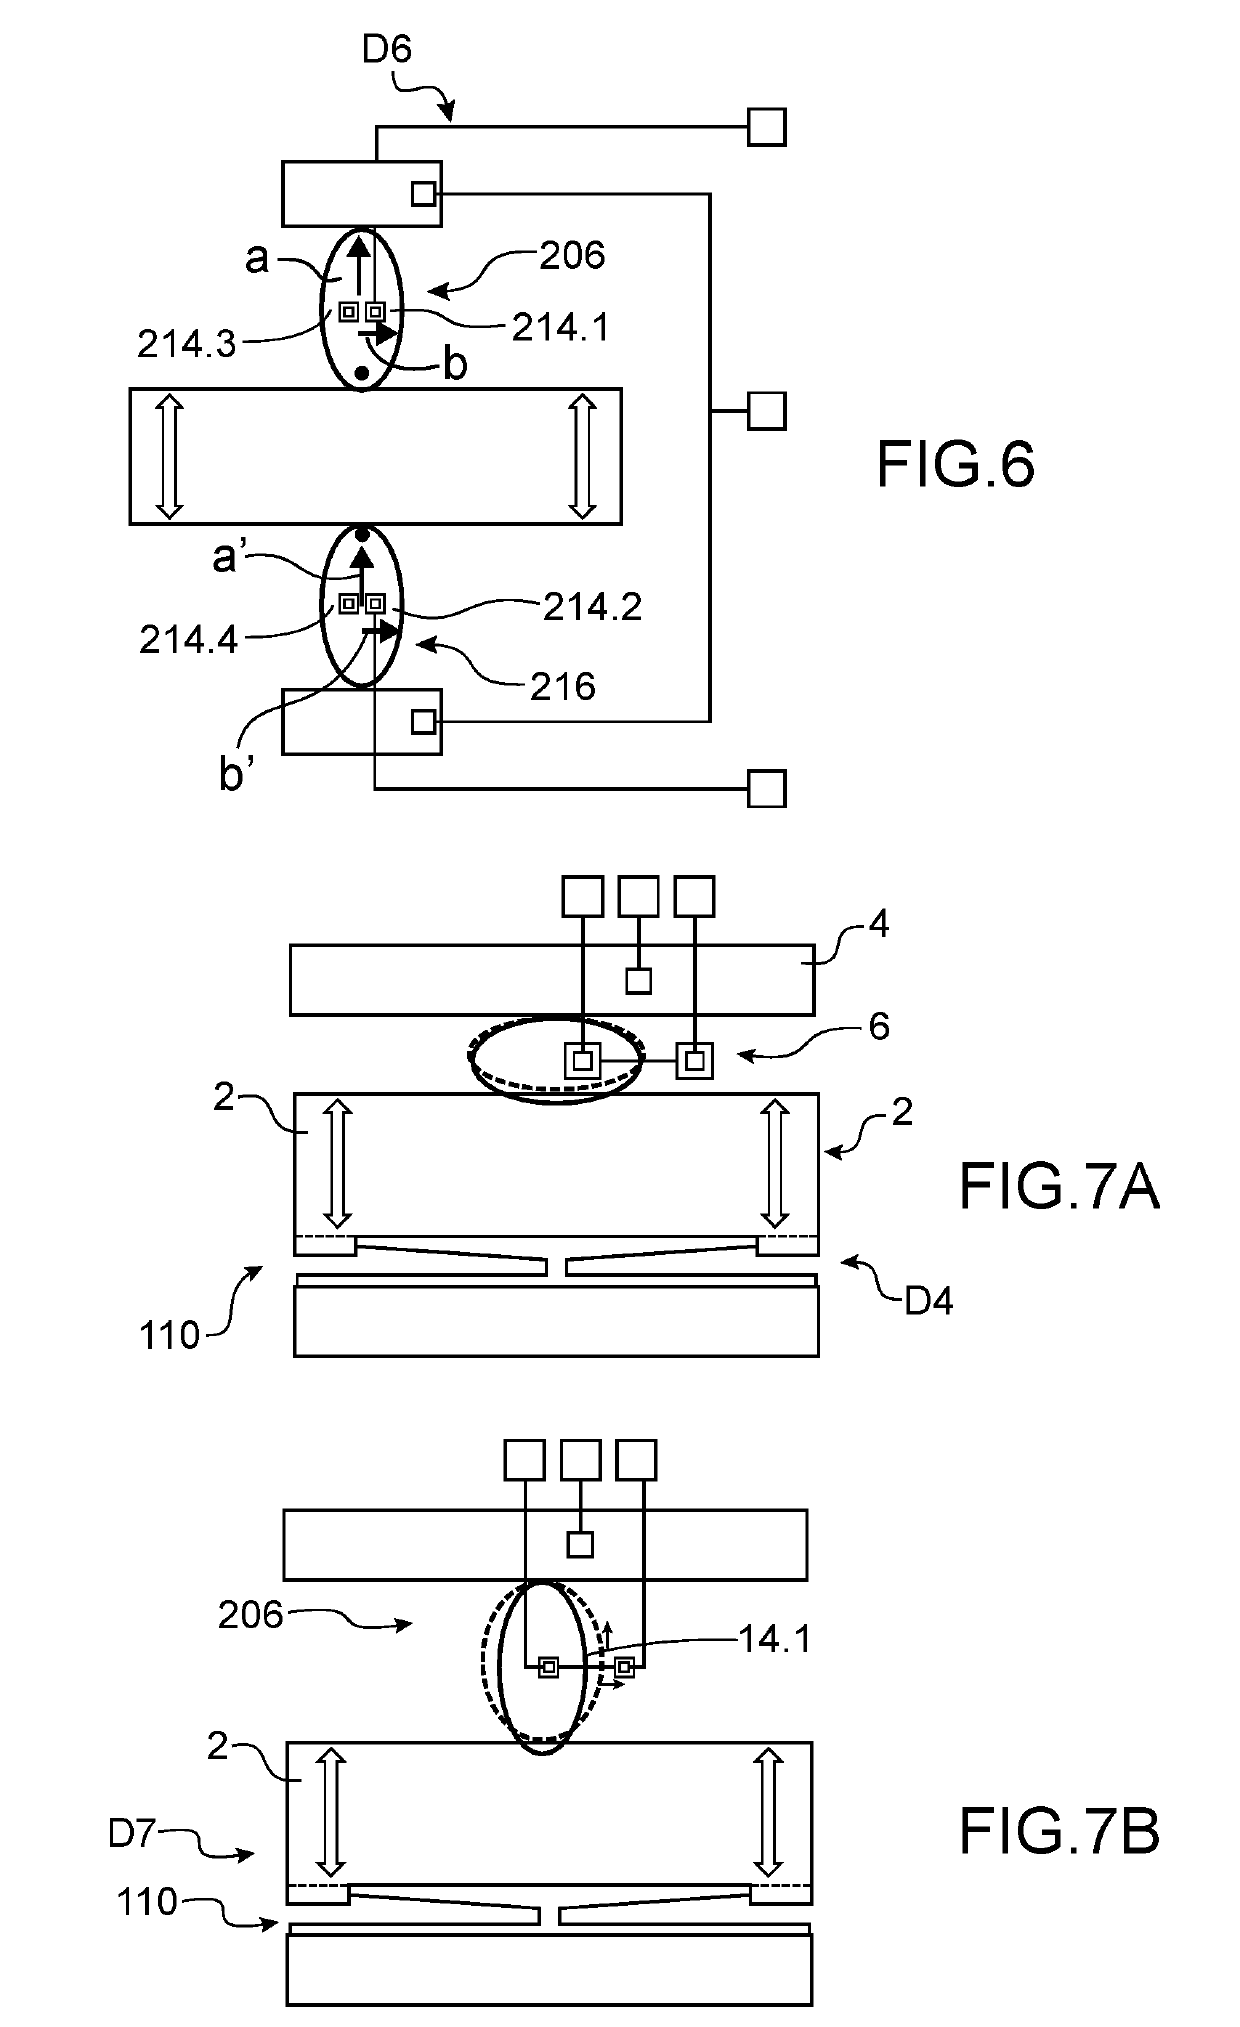 Microelectromechanical and/or nanoelectromechanical device offering improved robustness